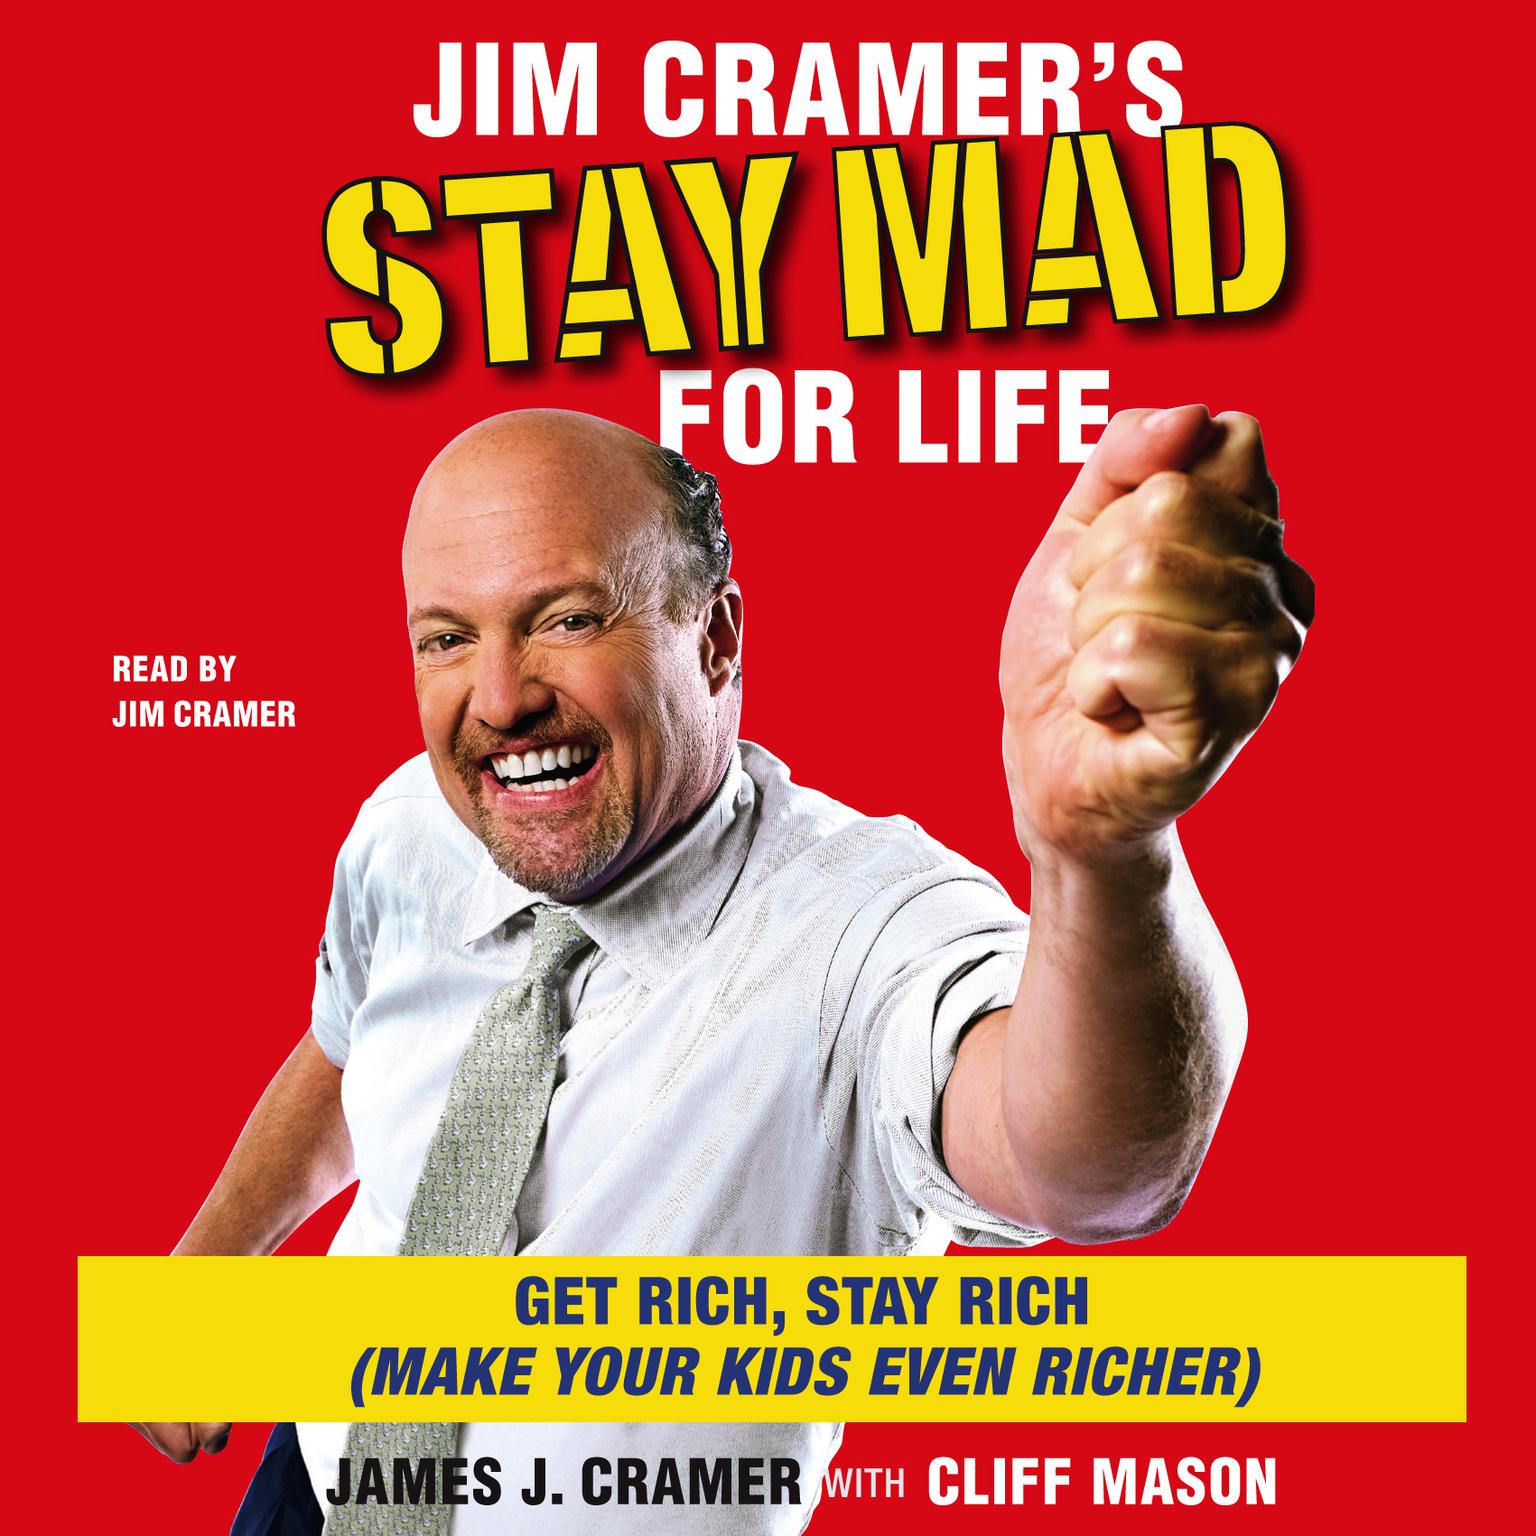 Jim Cramers Stay Mad for Life (Abridged): Get Rich, Stay Rich (Make Your Kids Even Richer) Audiobook, by James J. Cramer